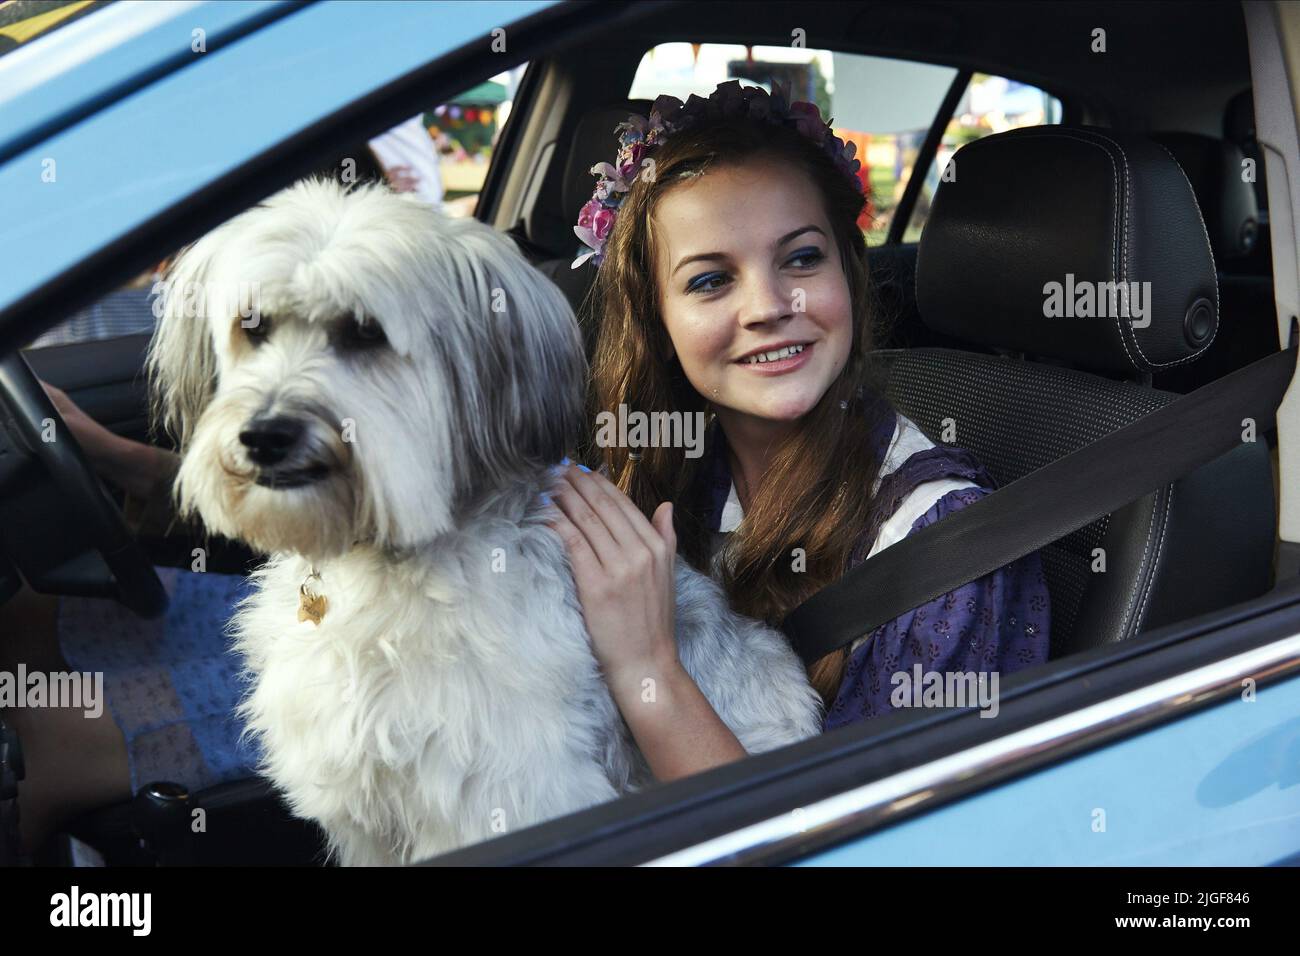 PUDSEY, IZZY MEIKLE-SMALL, PUDSEY THE DOG: THE MOVIE, 2014 Stock Photo